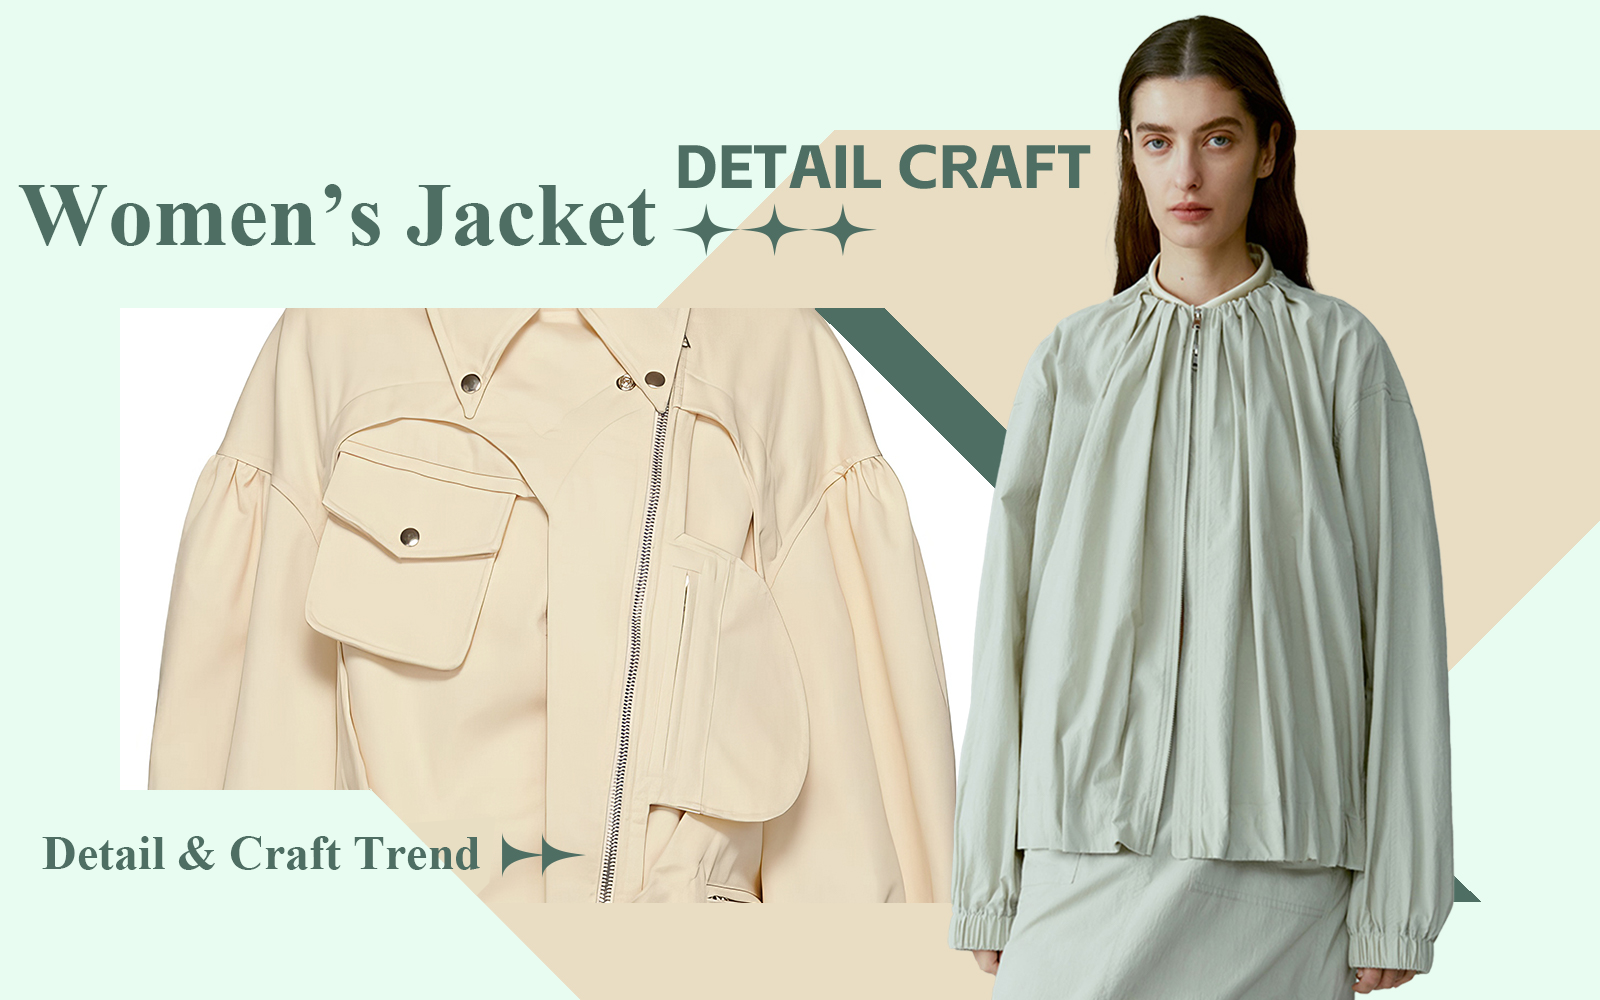 The Detail & Craft Trend for Women's Jacket